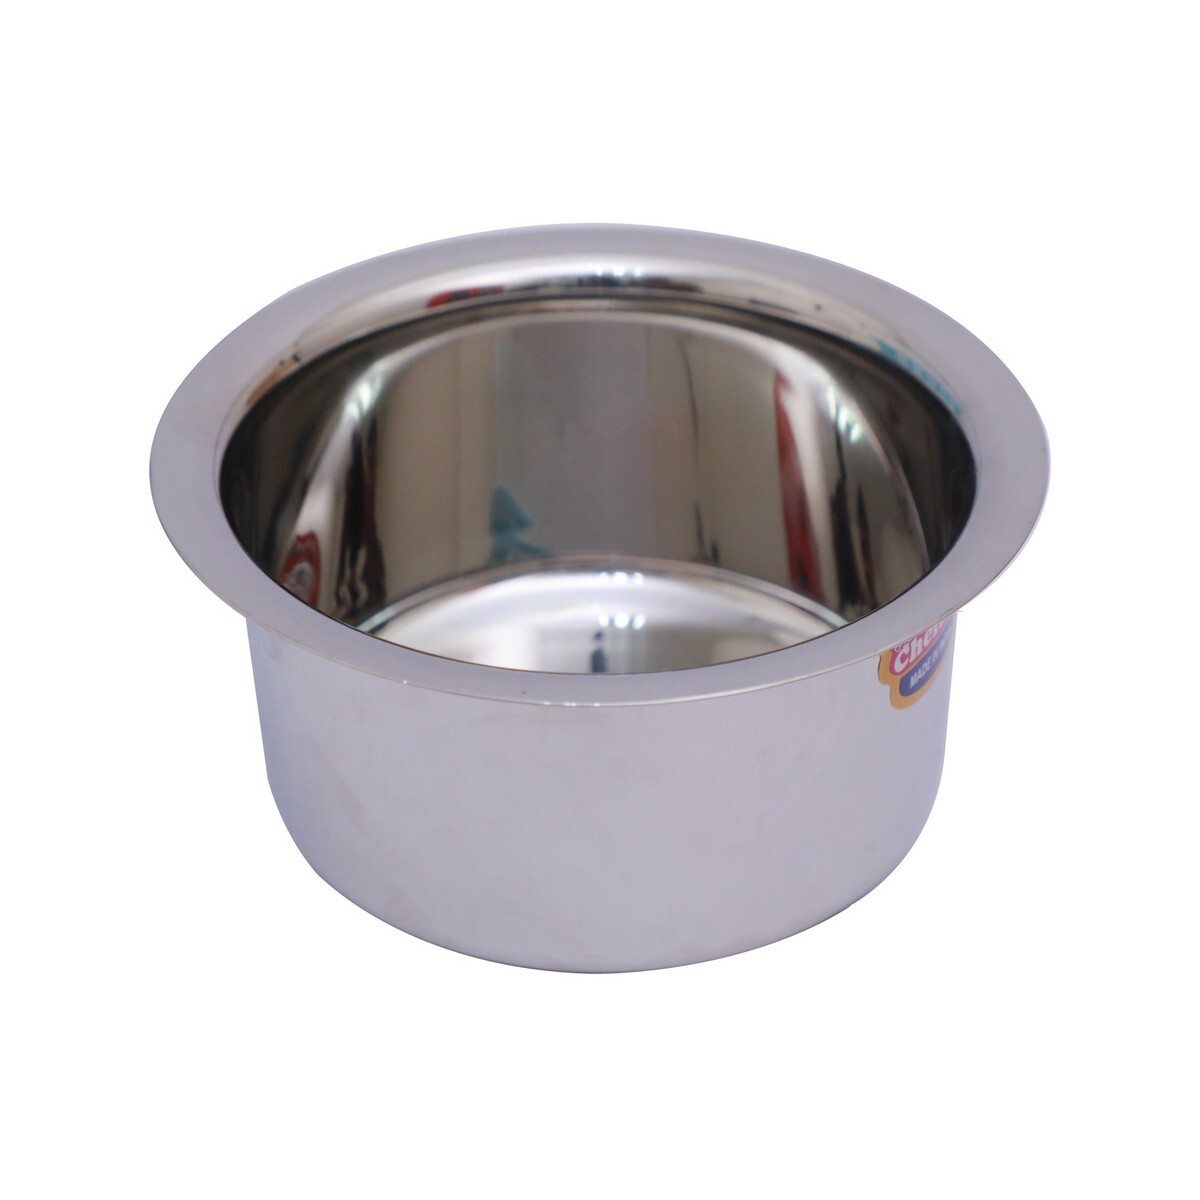 Chefline Tope Set Round With Lid-10